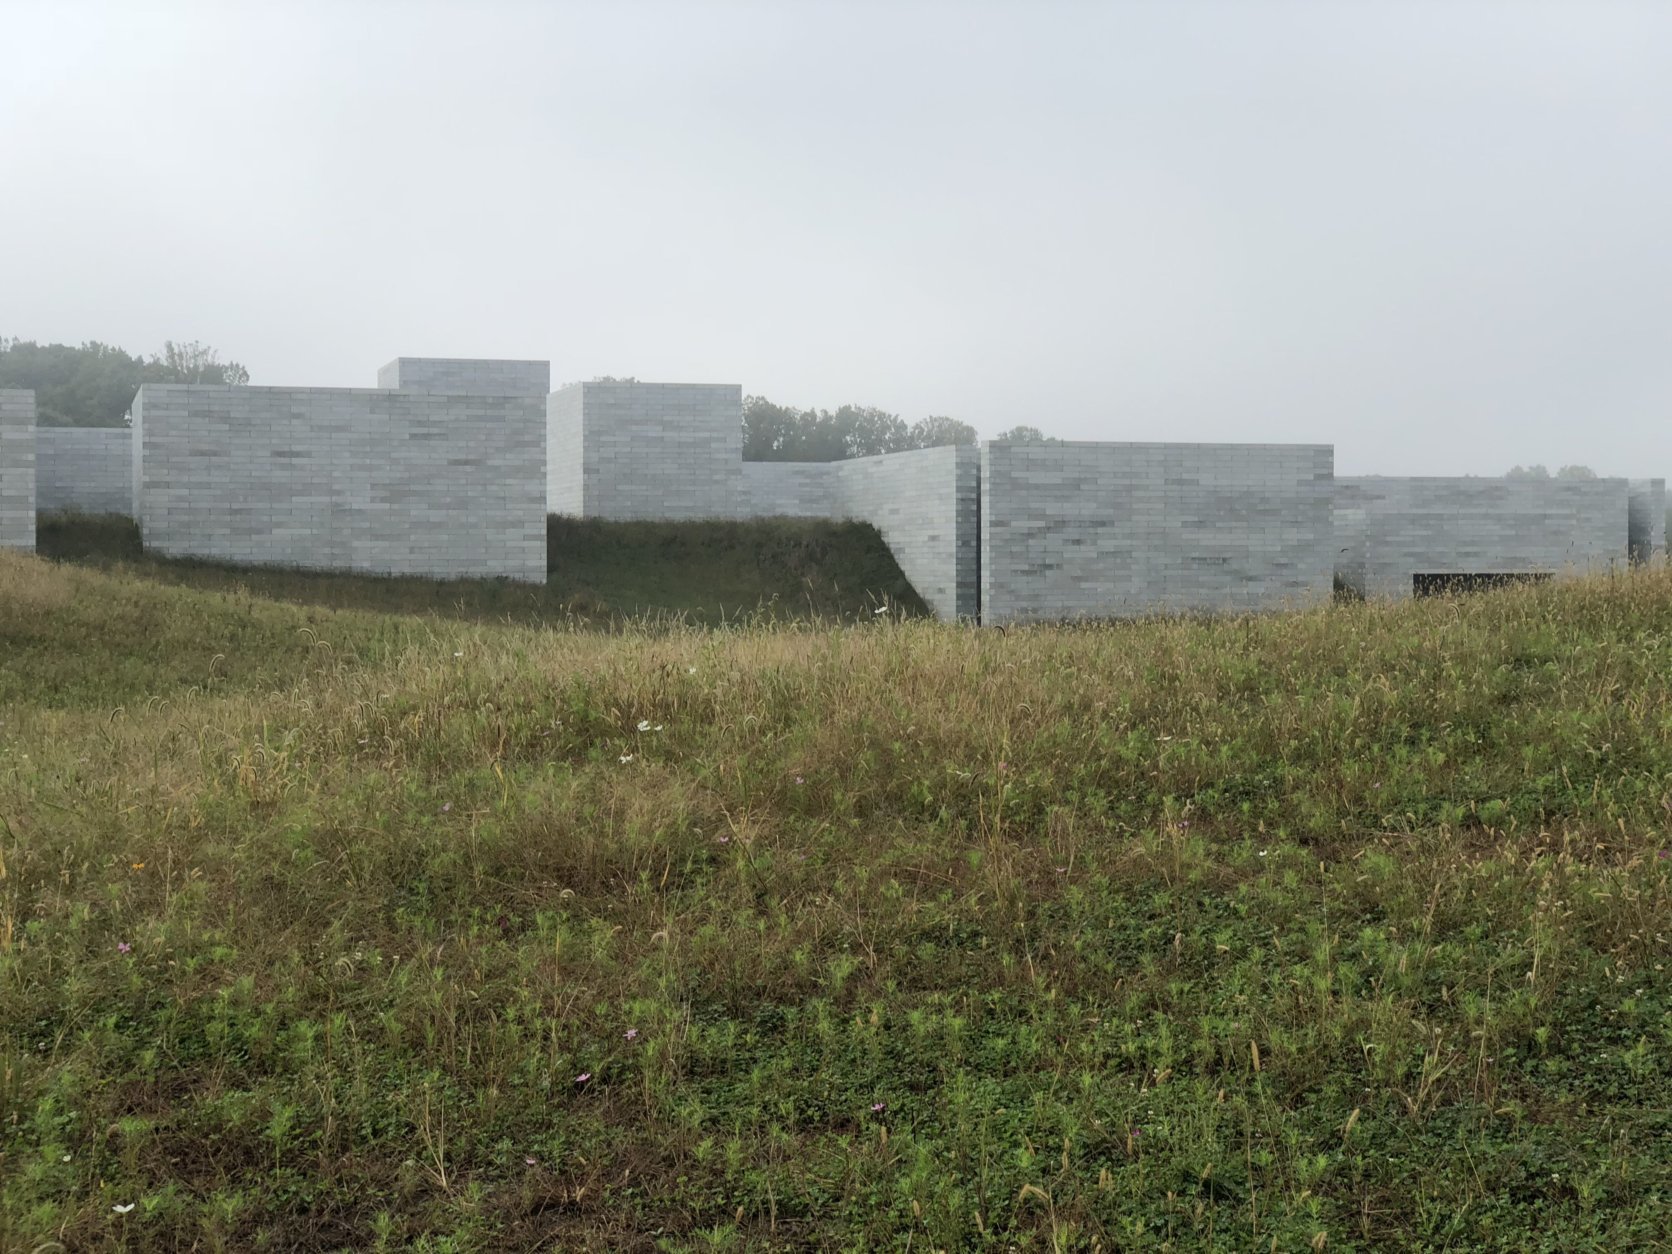 <p><strong>Get out to Glenstone</strong></p>
<p>The 15-mile ride out to <a href="https://www.glenstone.org/" target="_blank" rel="noopener">Glenstone</a> in Potomac, Maryland, is a must for modern art-lovers. The newly reopened museum includes a 204,000-square-foot building filled with water courts and gallery rooms. It&#8217;s surrounded by 230 acres of meadow, peppered with wildflowers, walking paths and outdoor sculptures. Admission is free but reservations are required and sometimes hard to come by. However, if you take the Montgomery County RideOn bus route 301 to the museum, you are guaranteed entry with no reservation required.</p>
